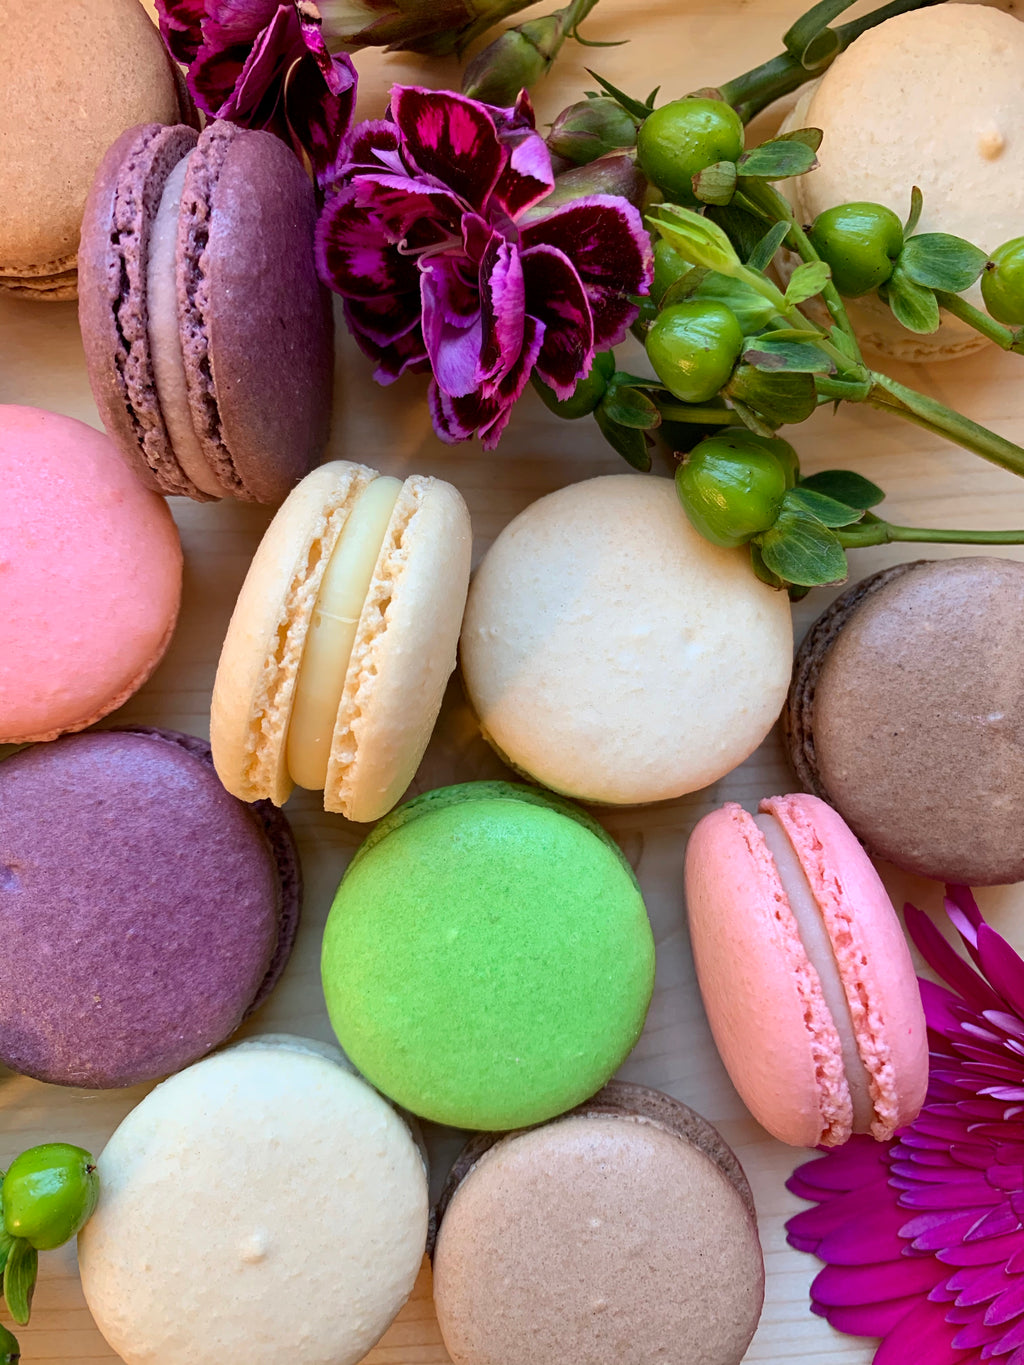 Flowers and macarons